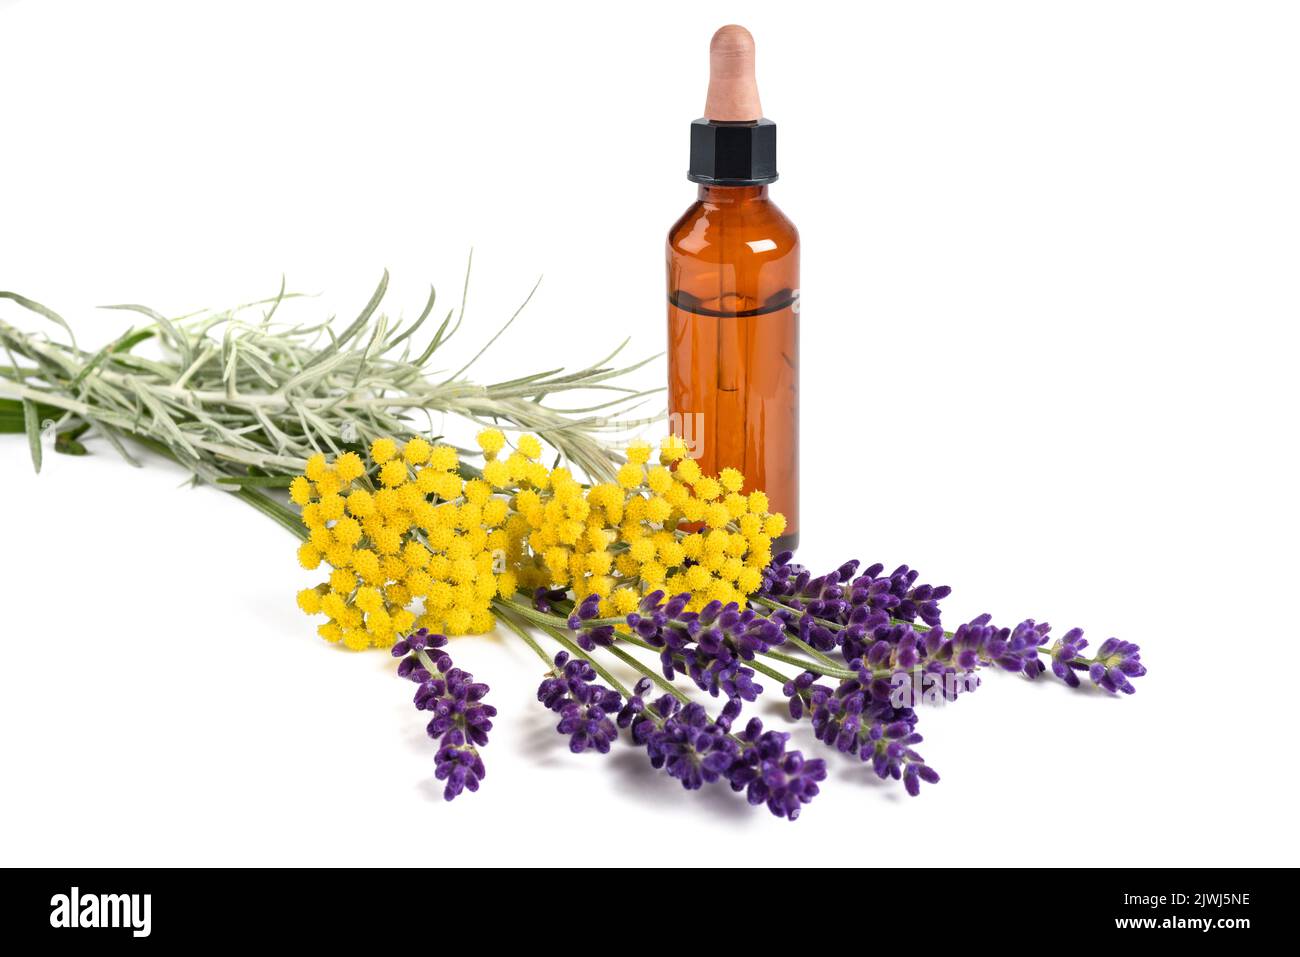 lavender and helichrysum flowers with bottle isolated on white background Stock Photo